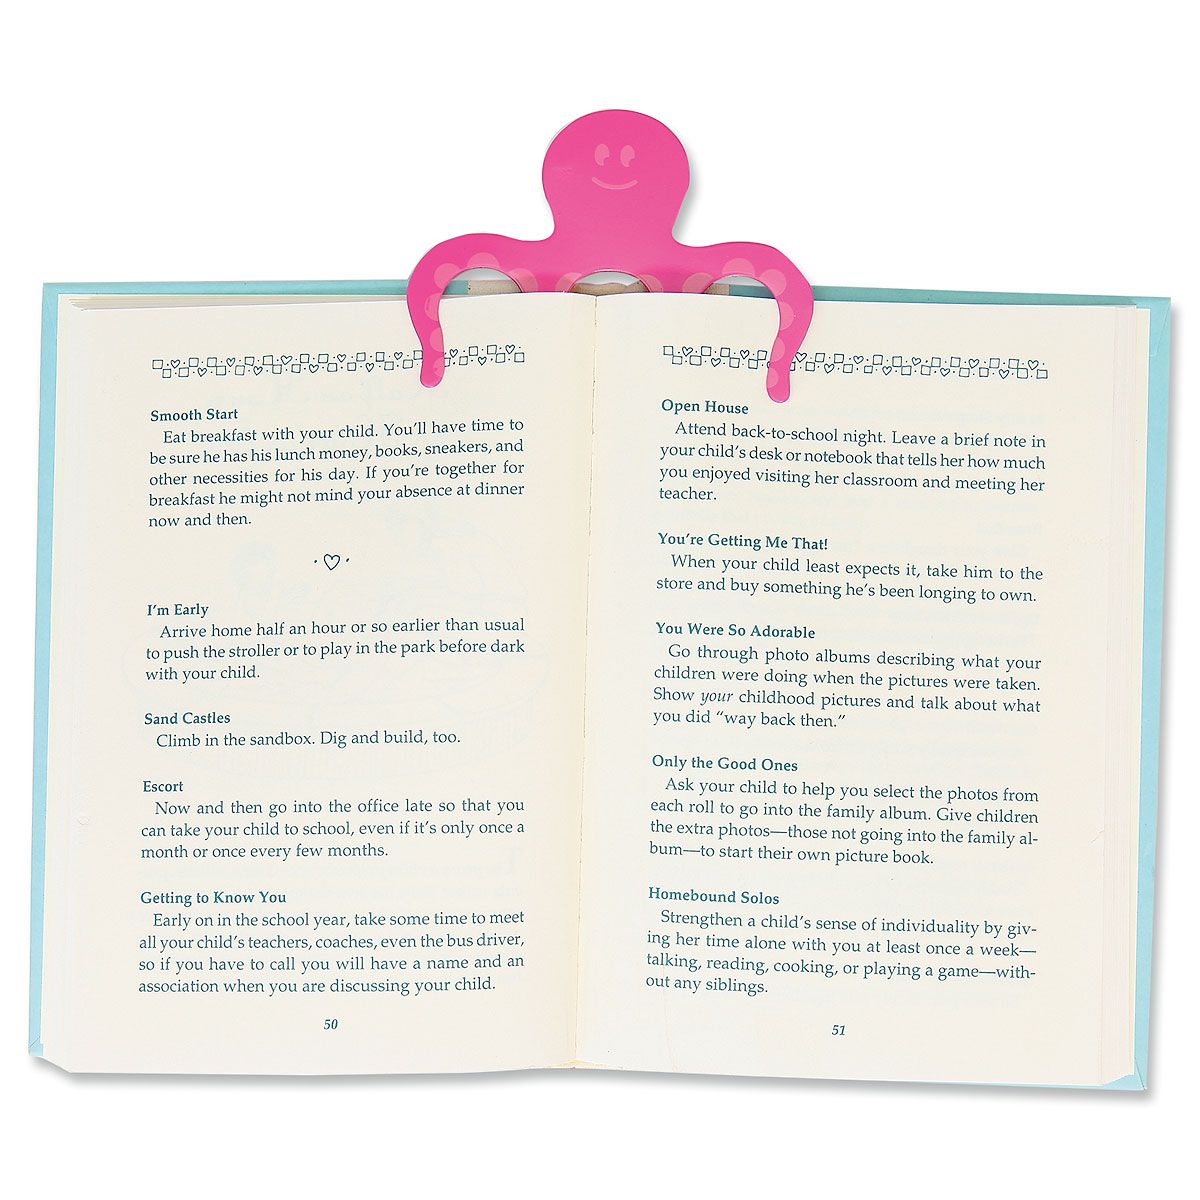 Booktopus Pink Bookmark Colorful Images